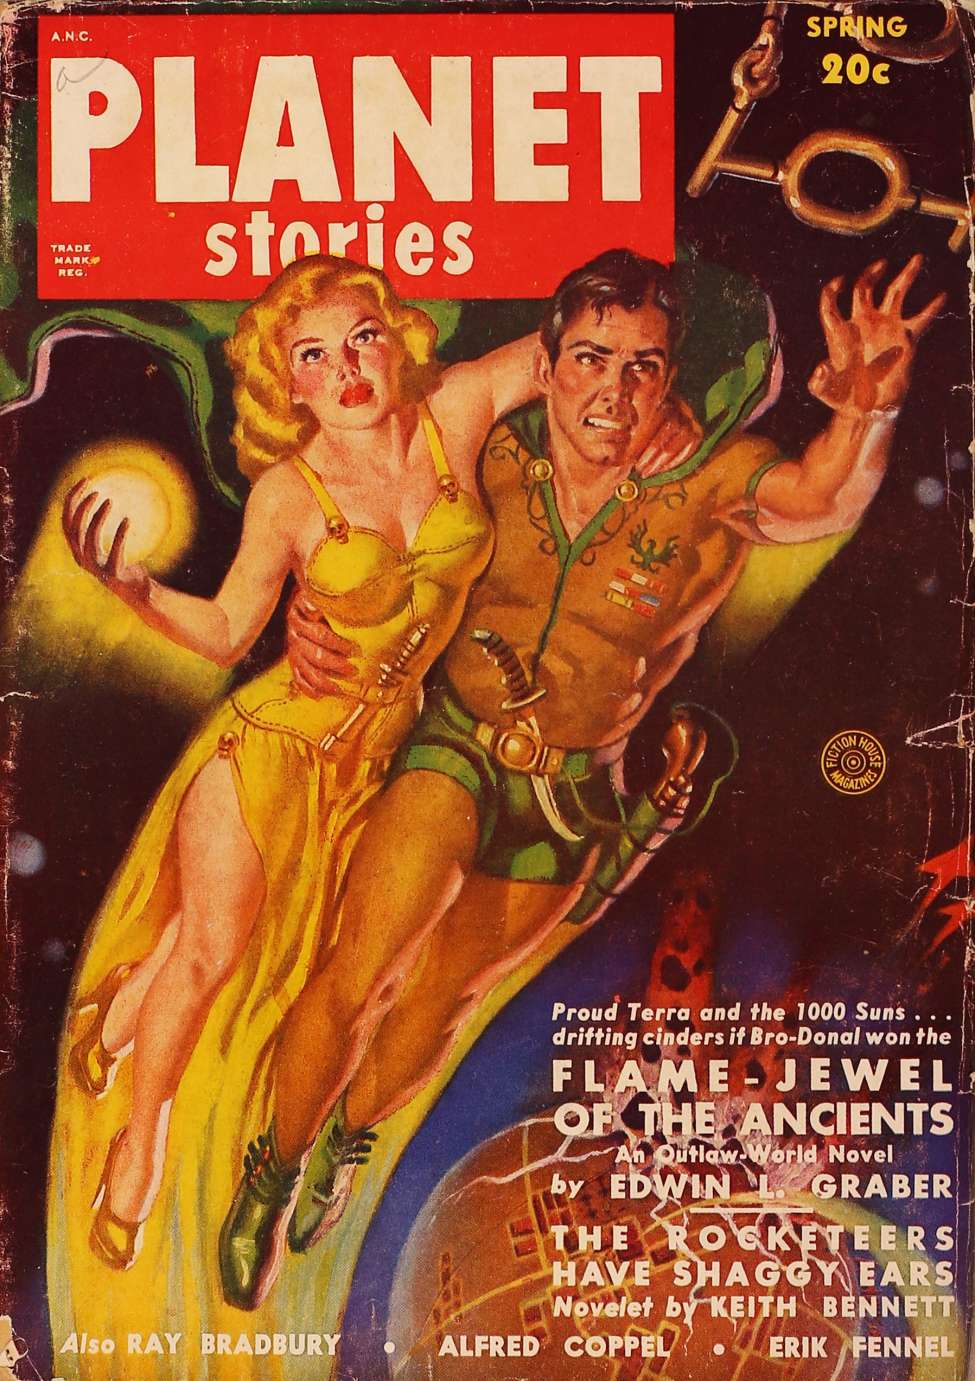 Book Cover For Planet Stories v4 6 - Flame-Jewel of the Ancients - Edwin L. Graber